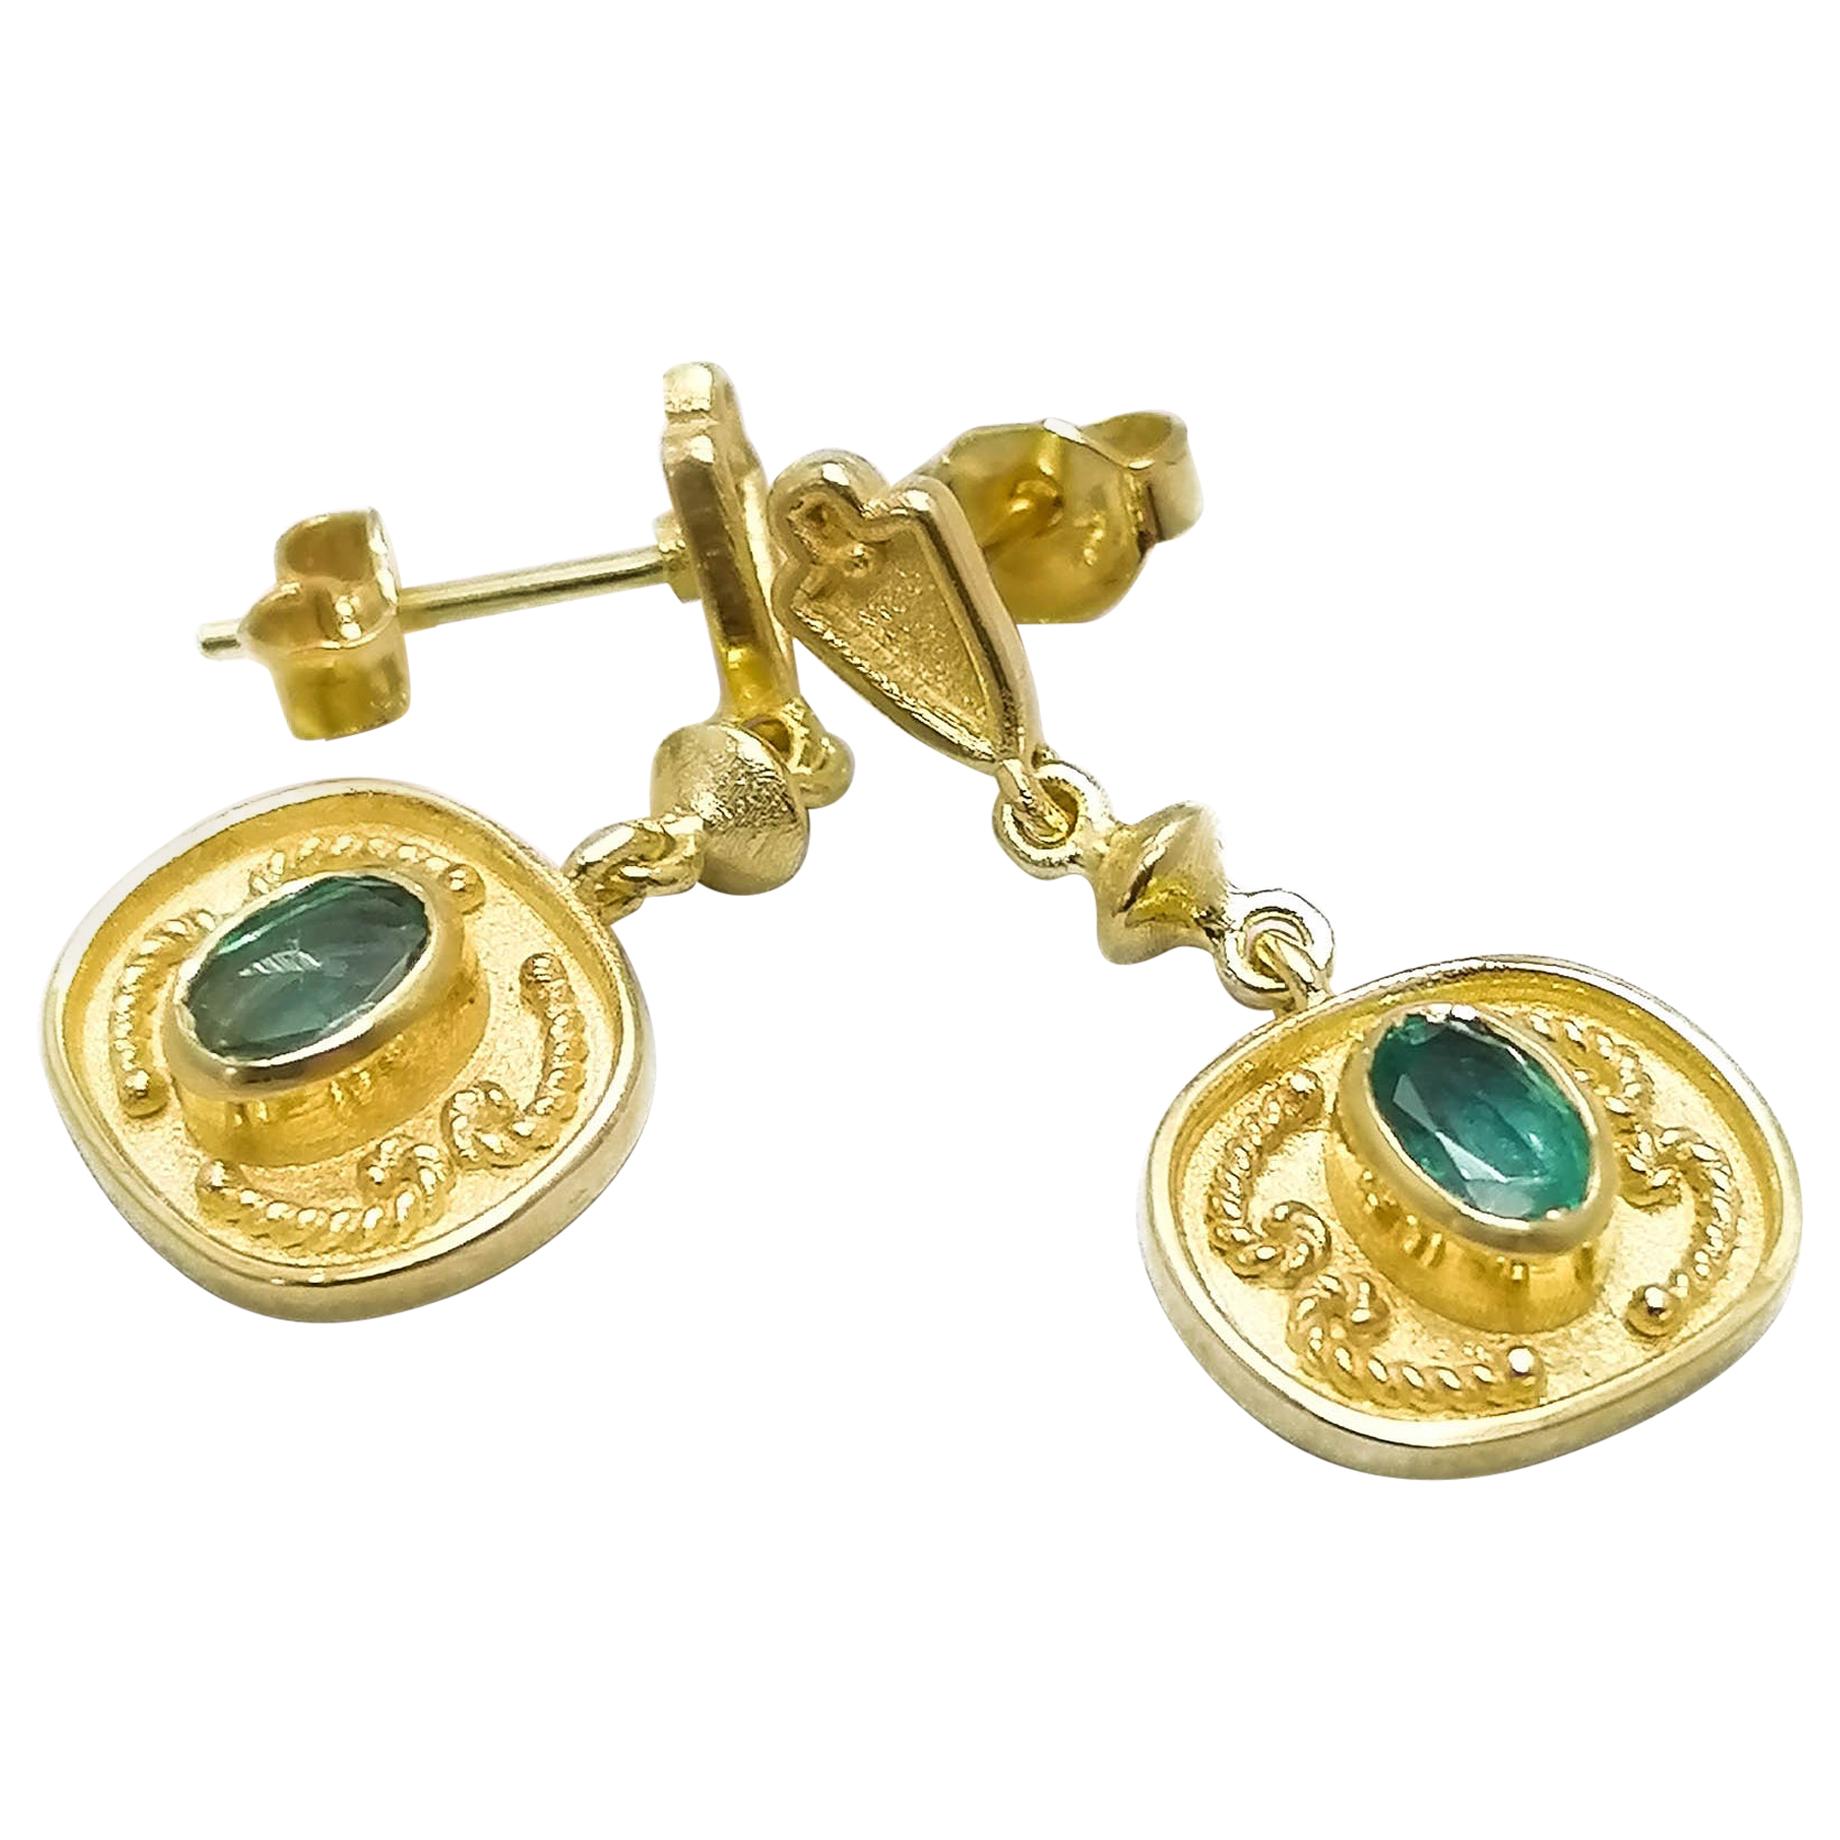 Georgios Collections 18 Karat Yellow Gold Emerald Etruscan-Style Drop Earrings